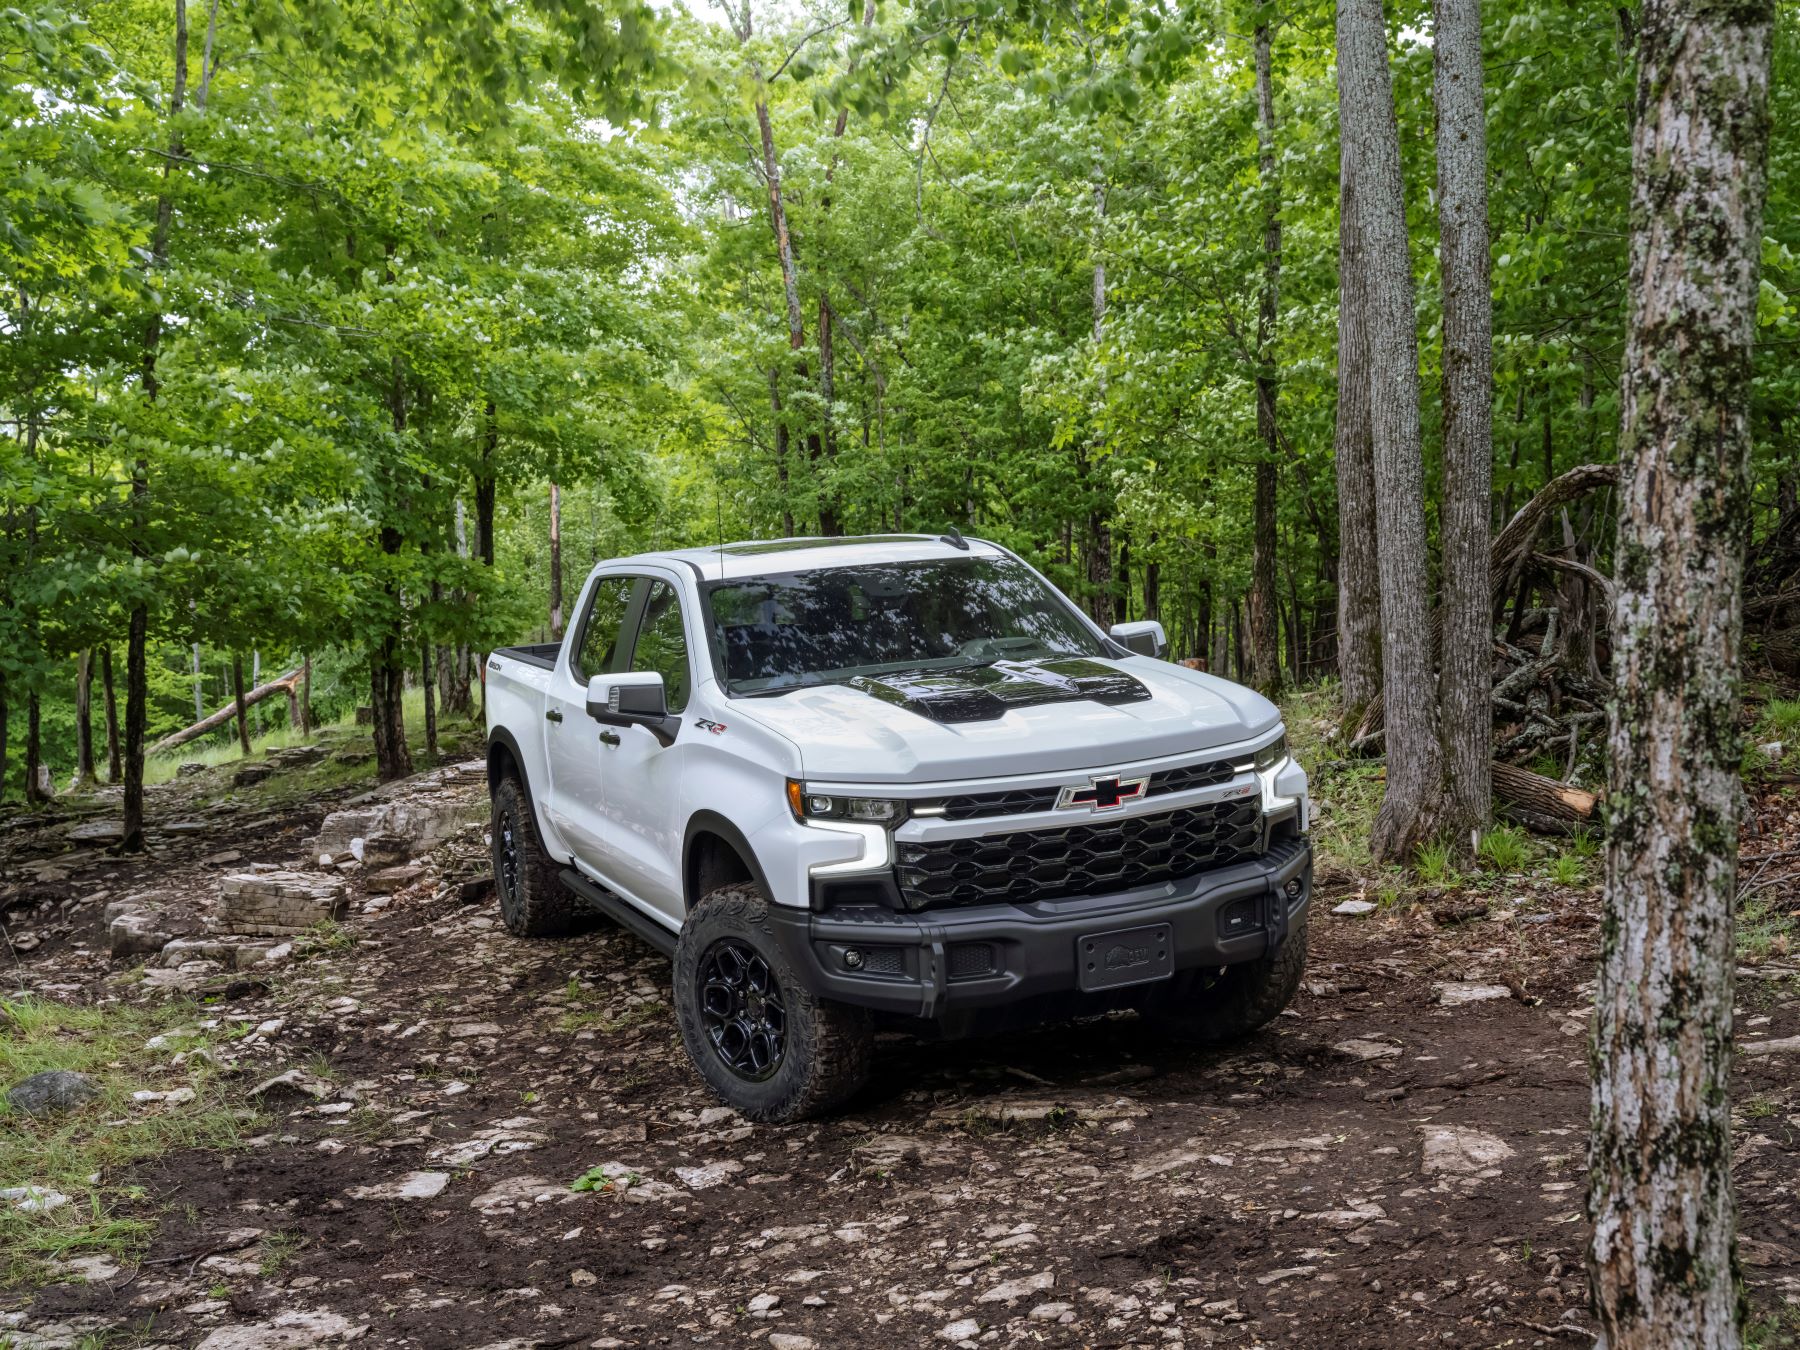 2023 Chevrolet Chevy Silverado ZR2 Bison full-size off-road pickup truck model driving over rocks in a forest